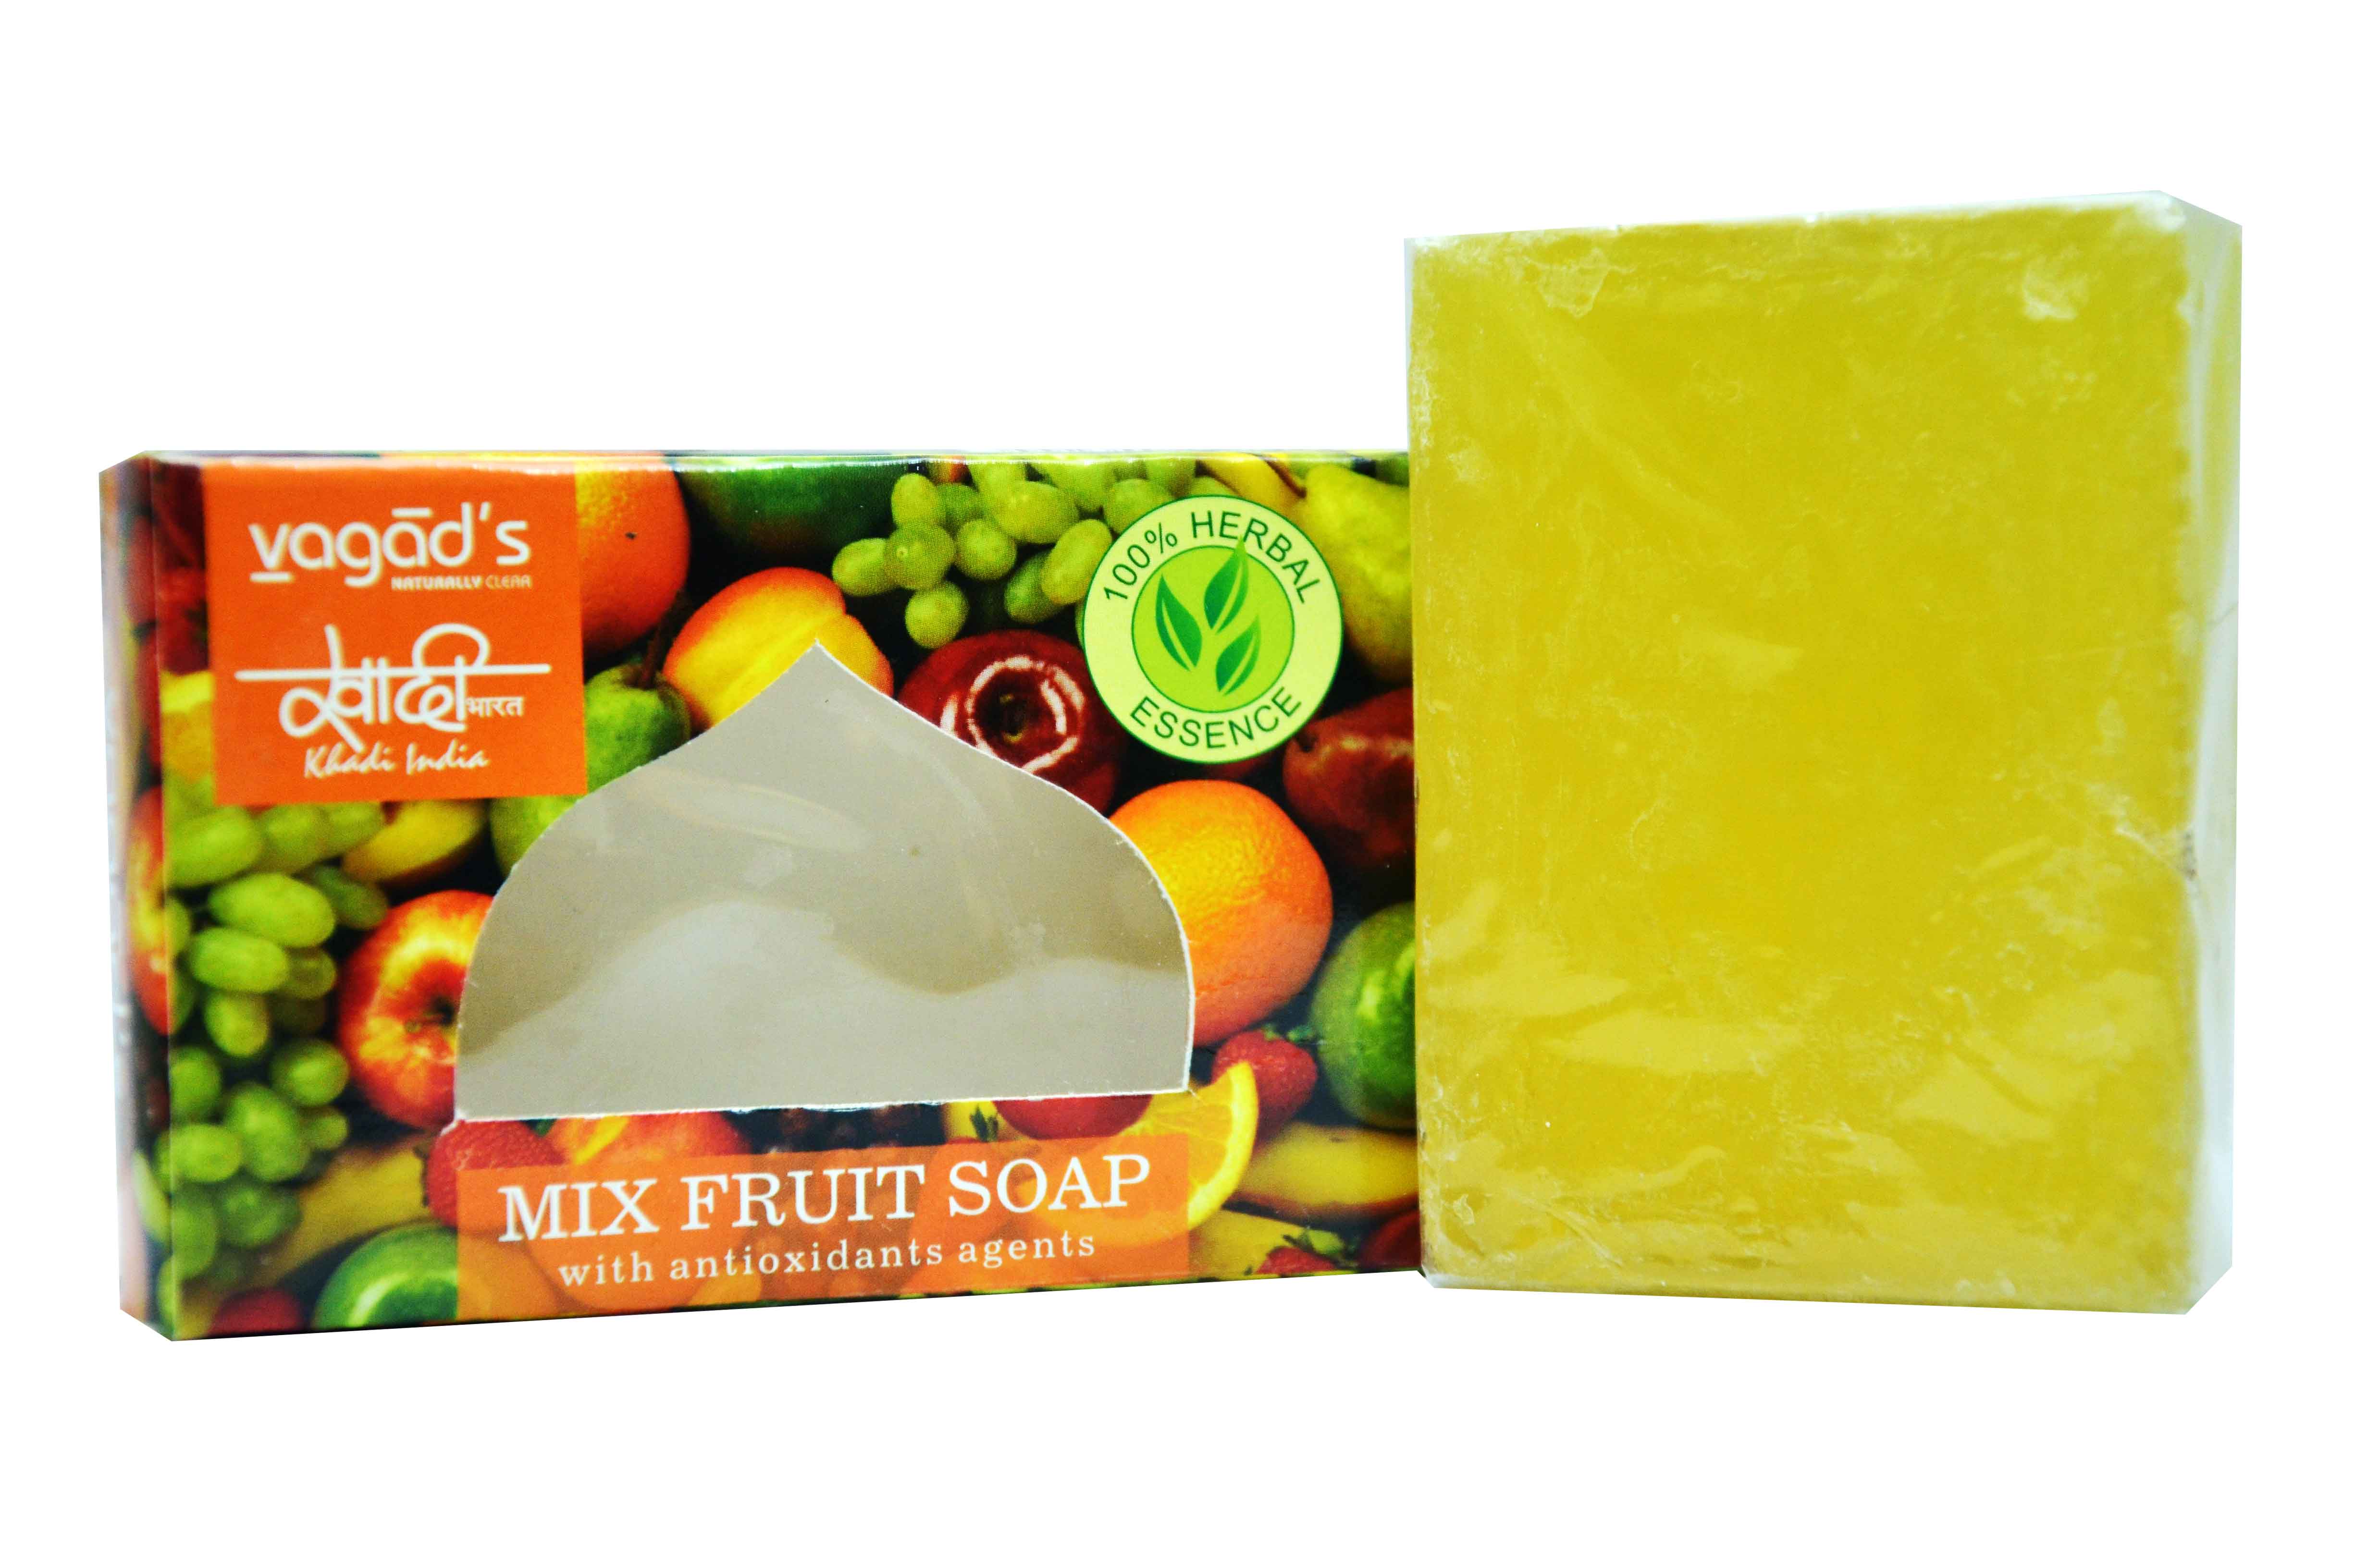 Buy Vagad's Khadi Mix Fruit Soap With Antioxidant Agents at Best Price Online